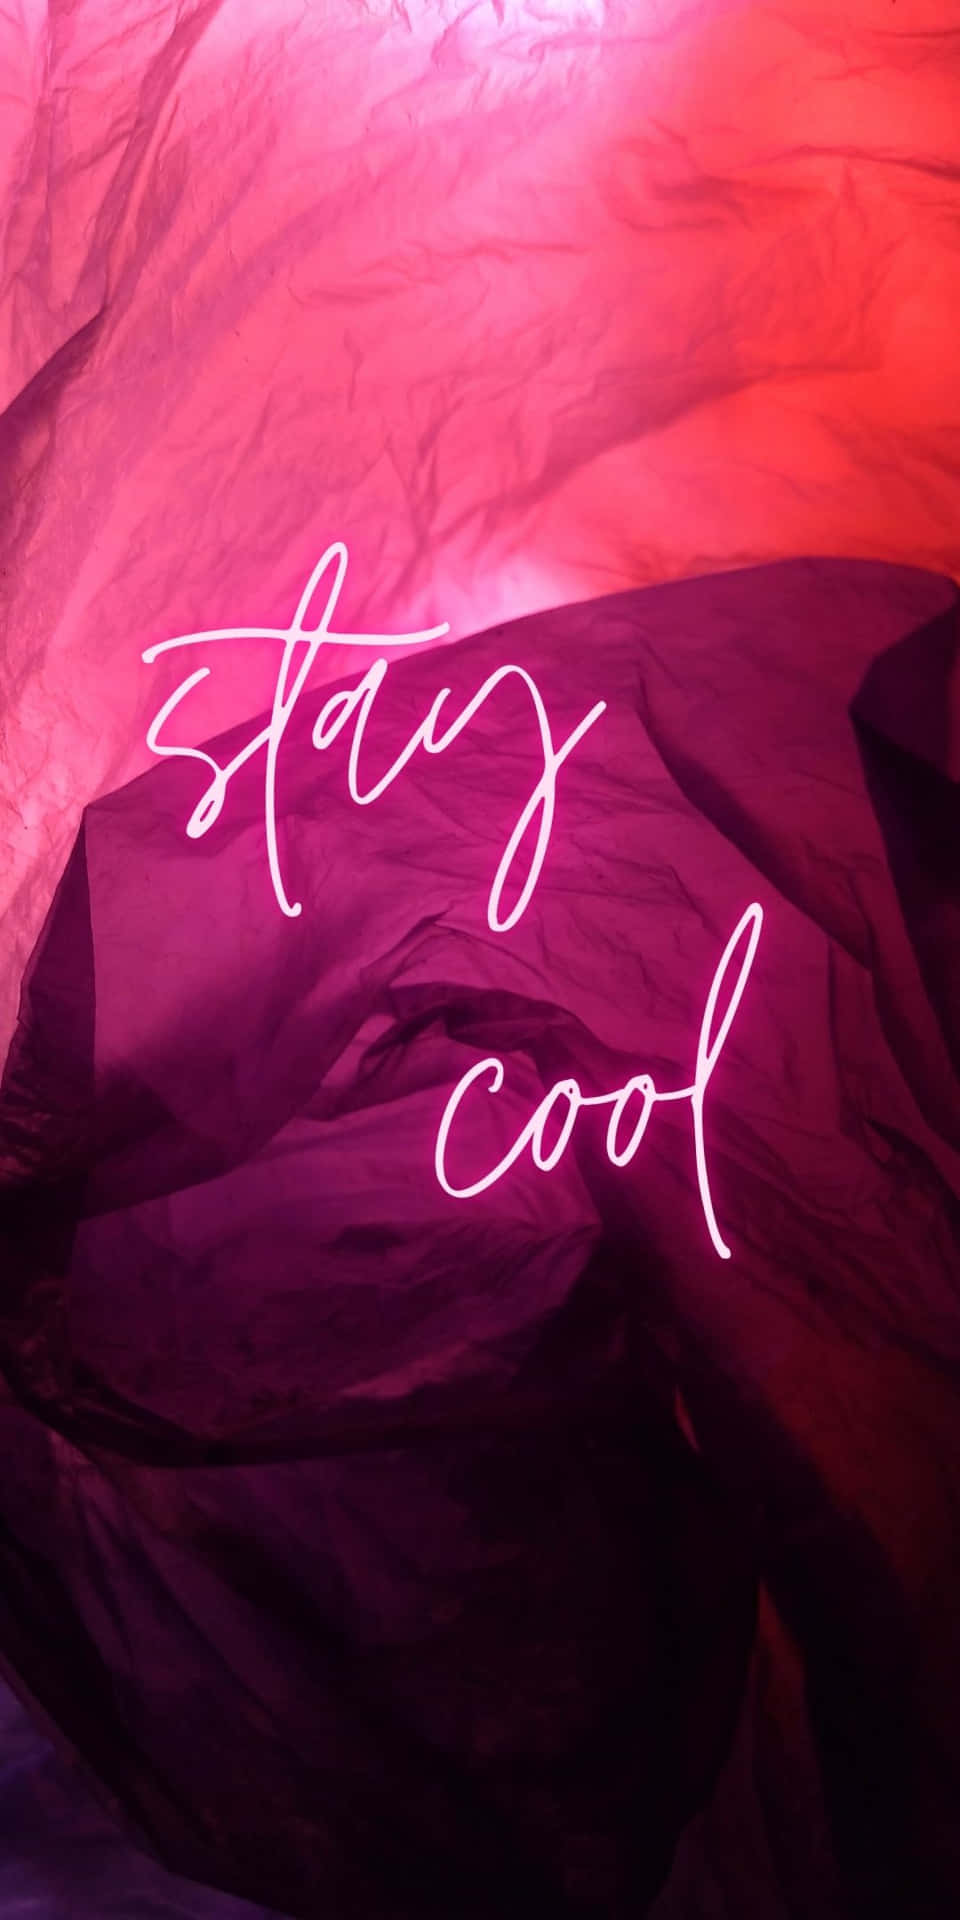 Stay Cool - A Neon Sign Background